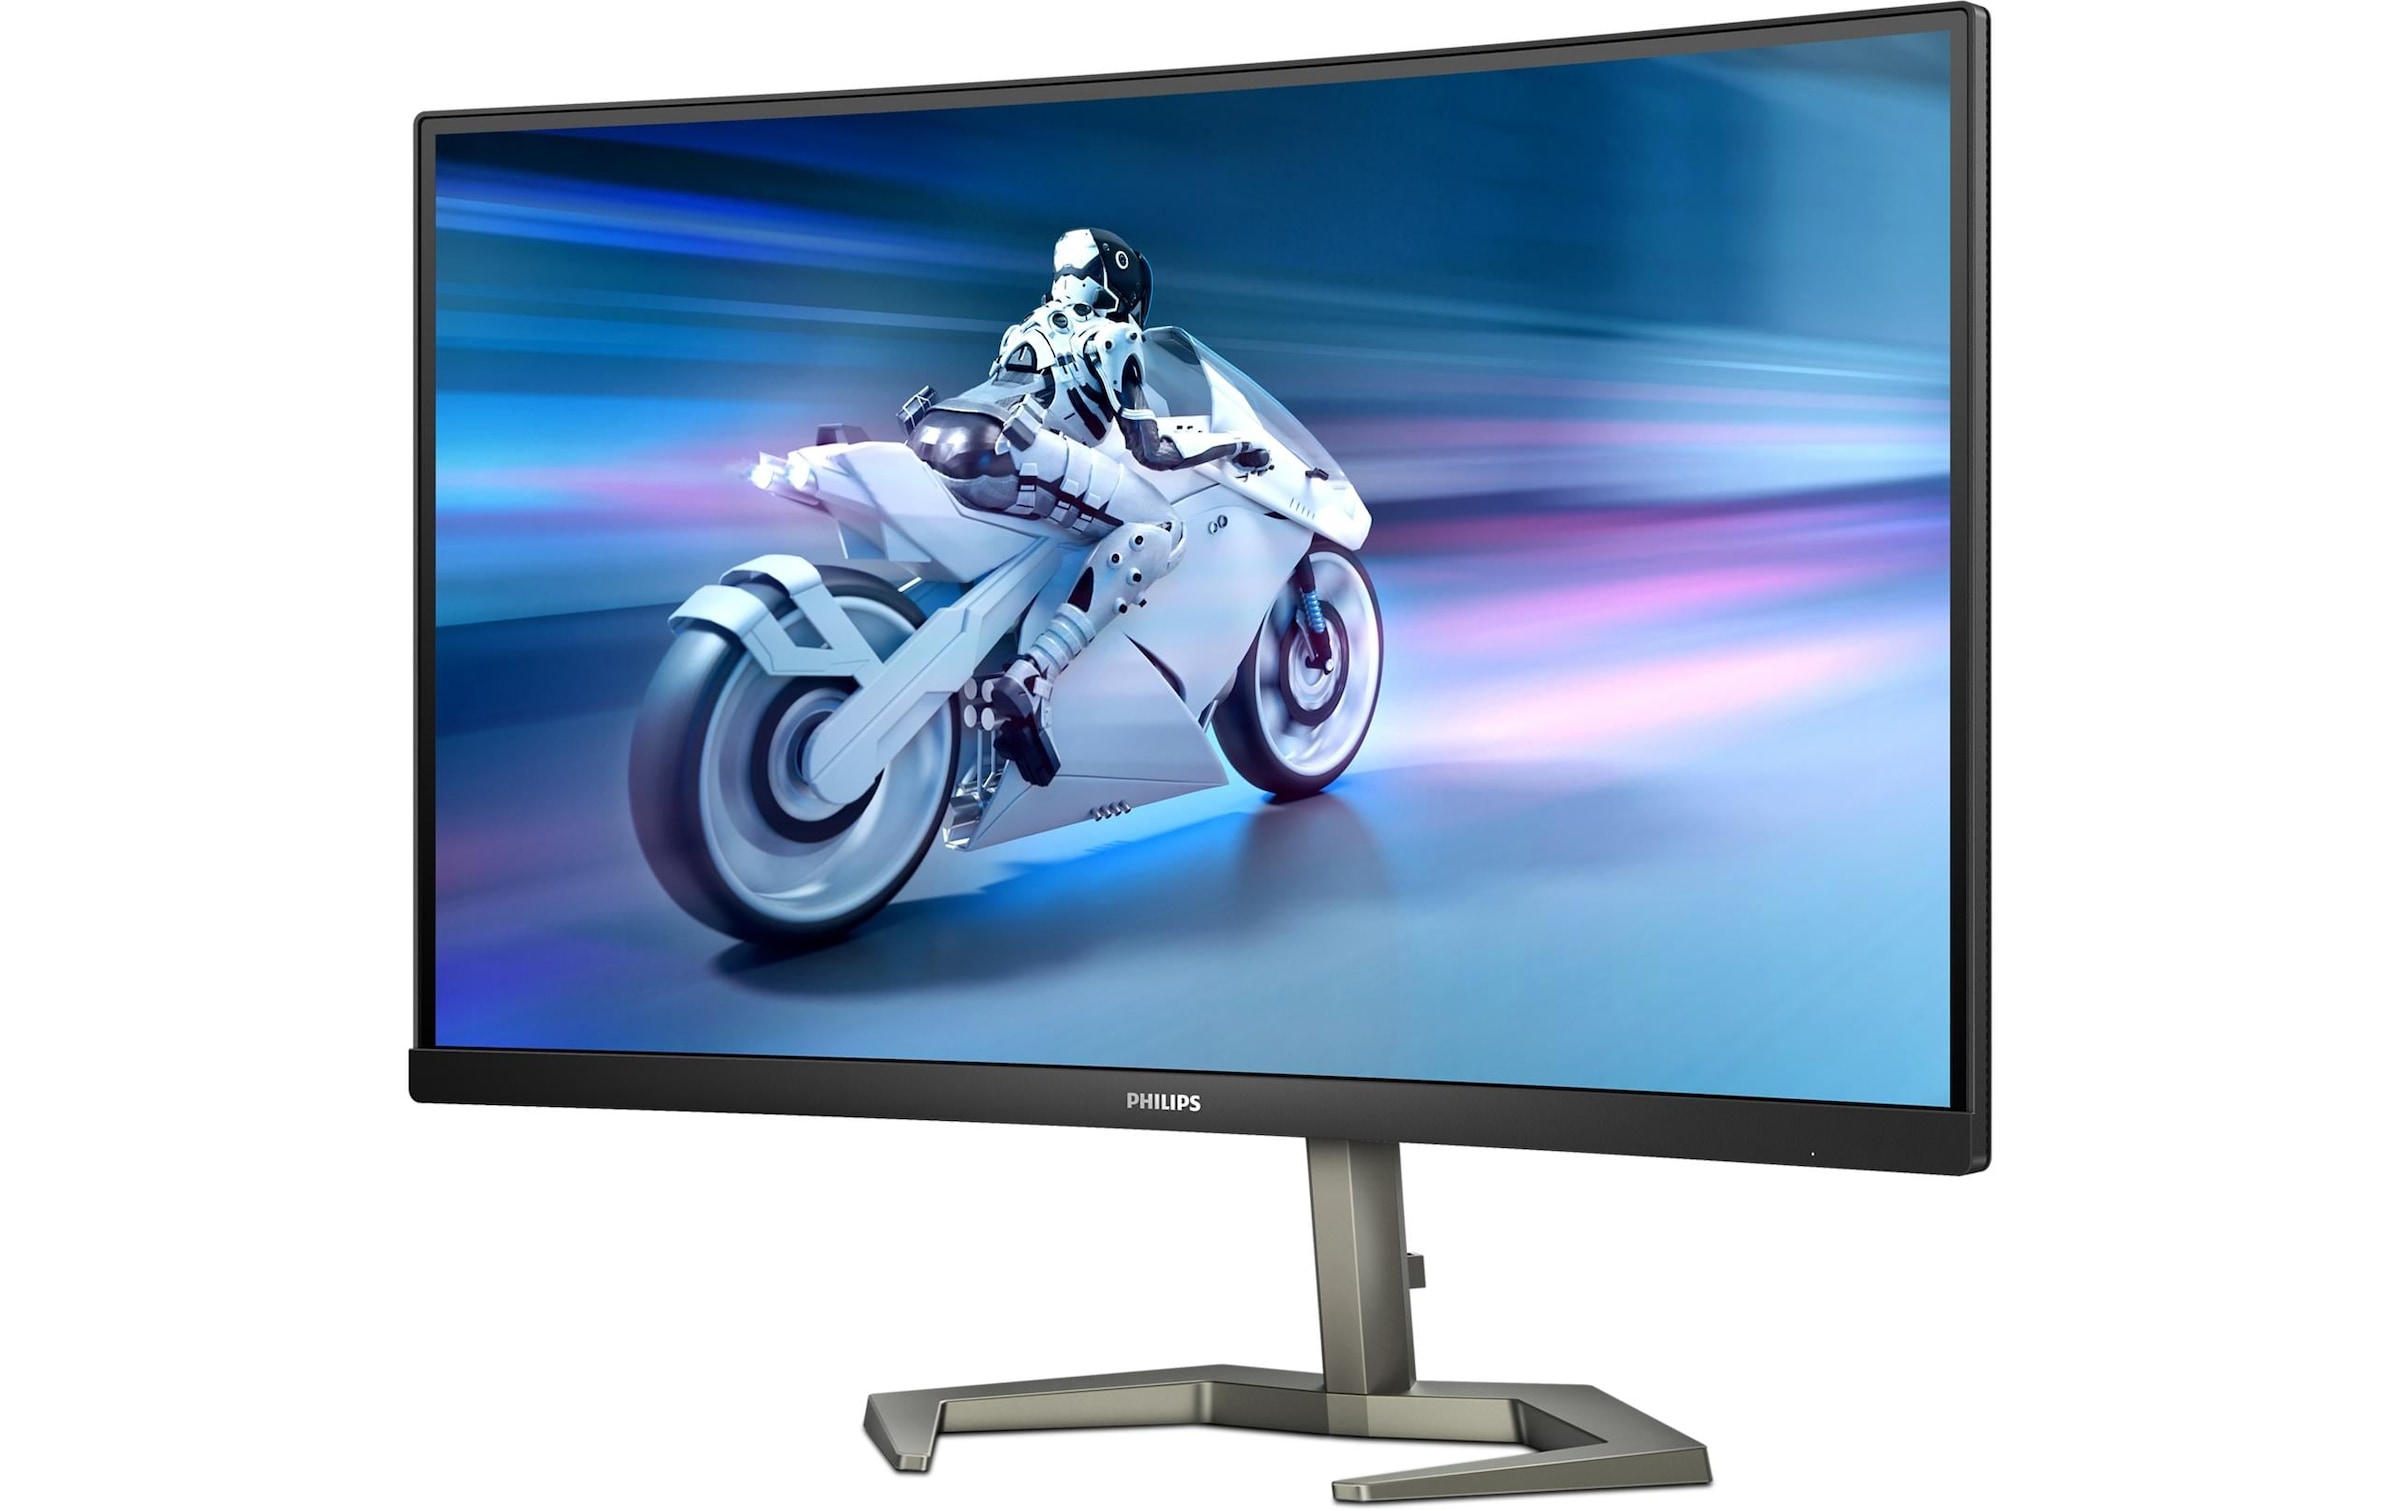 Philips Gaming-Monitor, 68,31 cm/27 Zoll, 1920 x 1080 px, Full HD, 4 ms Reaktionszeit, 240 Hz